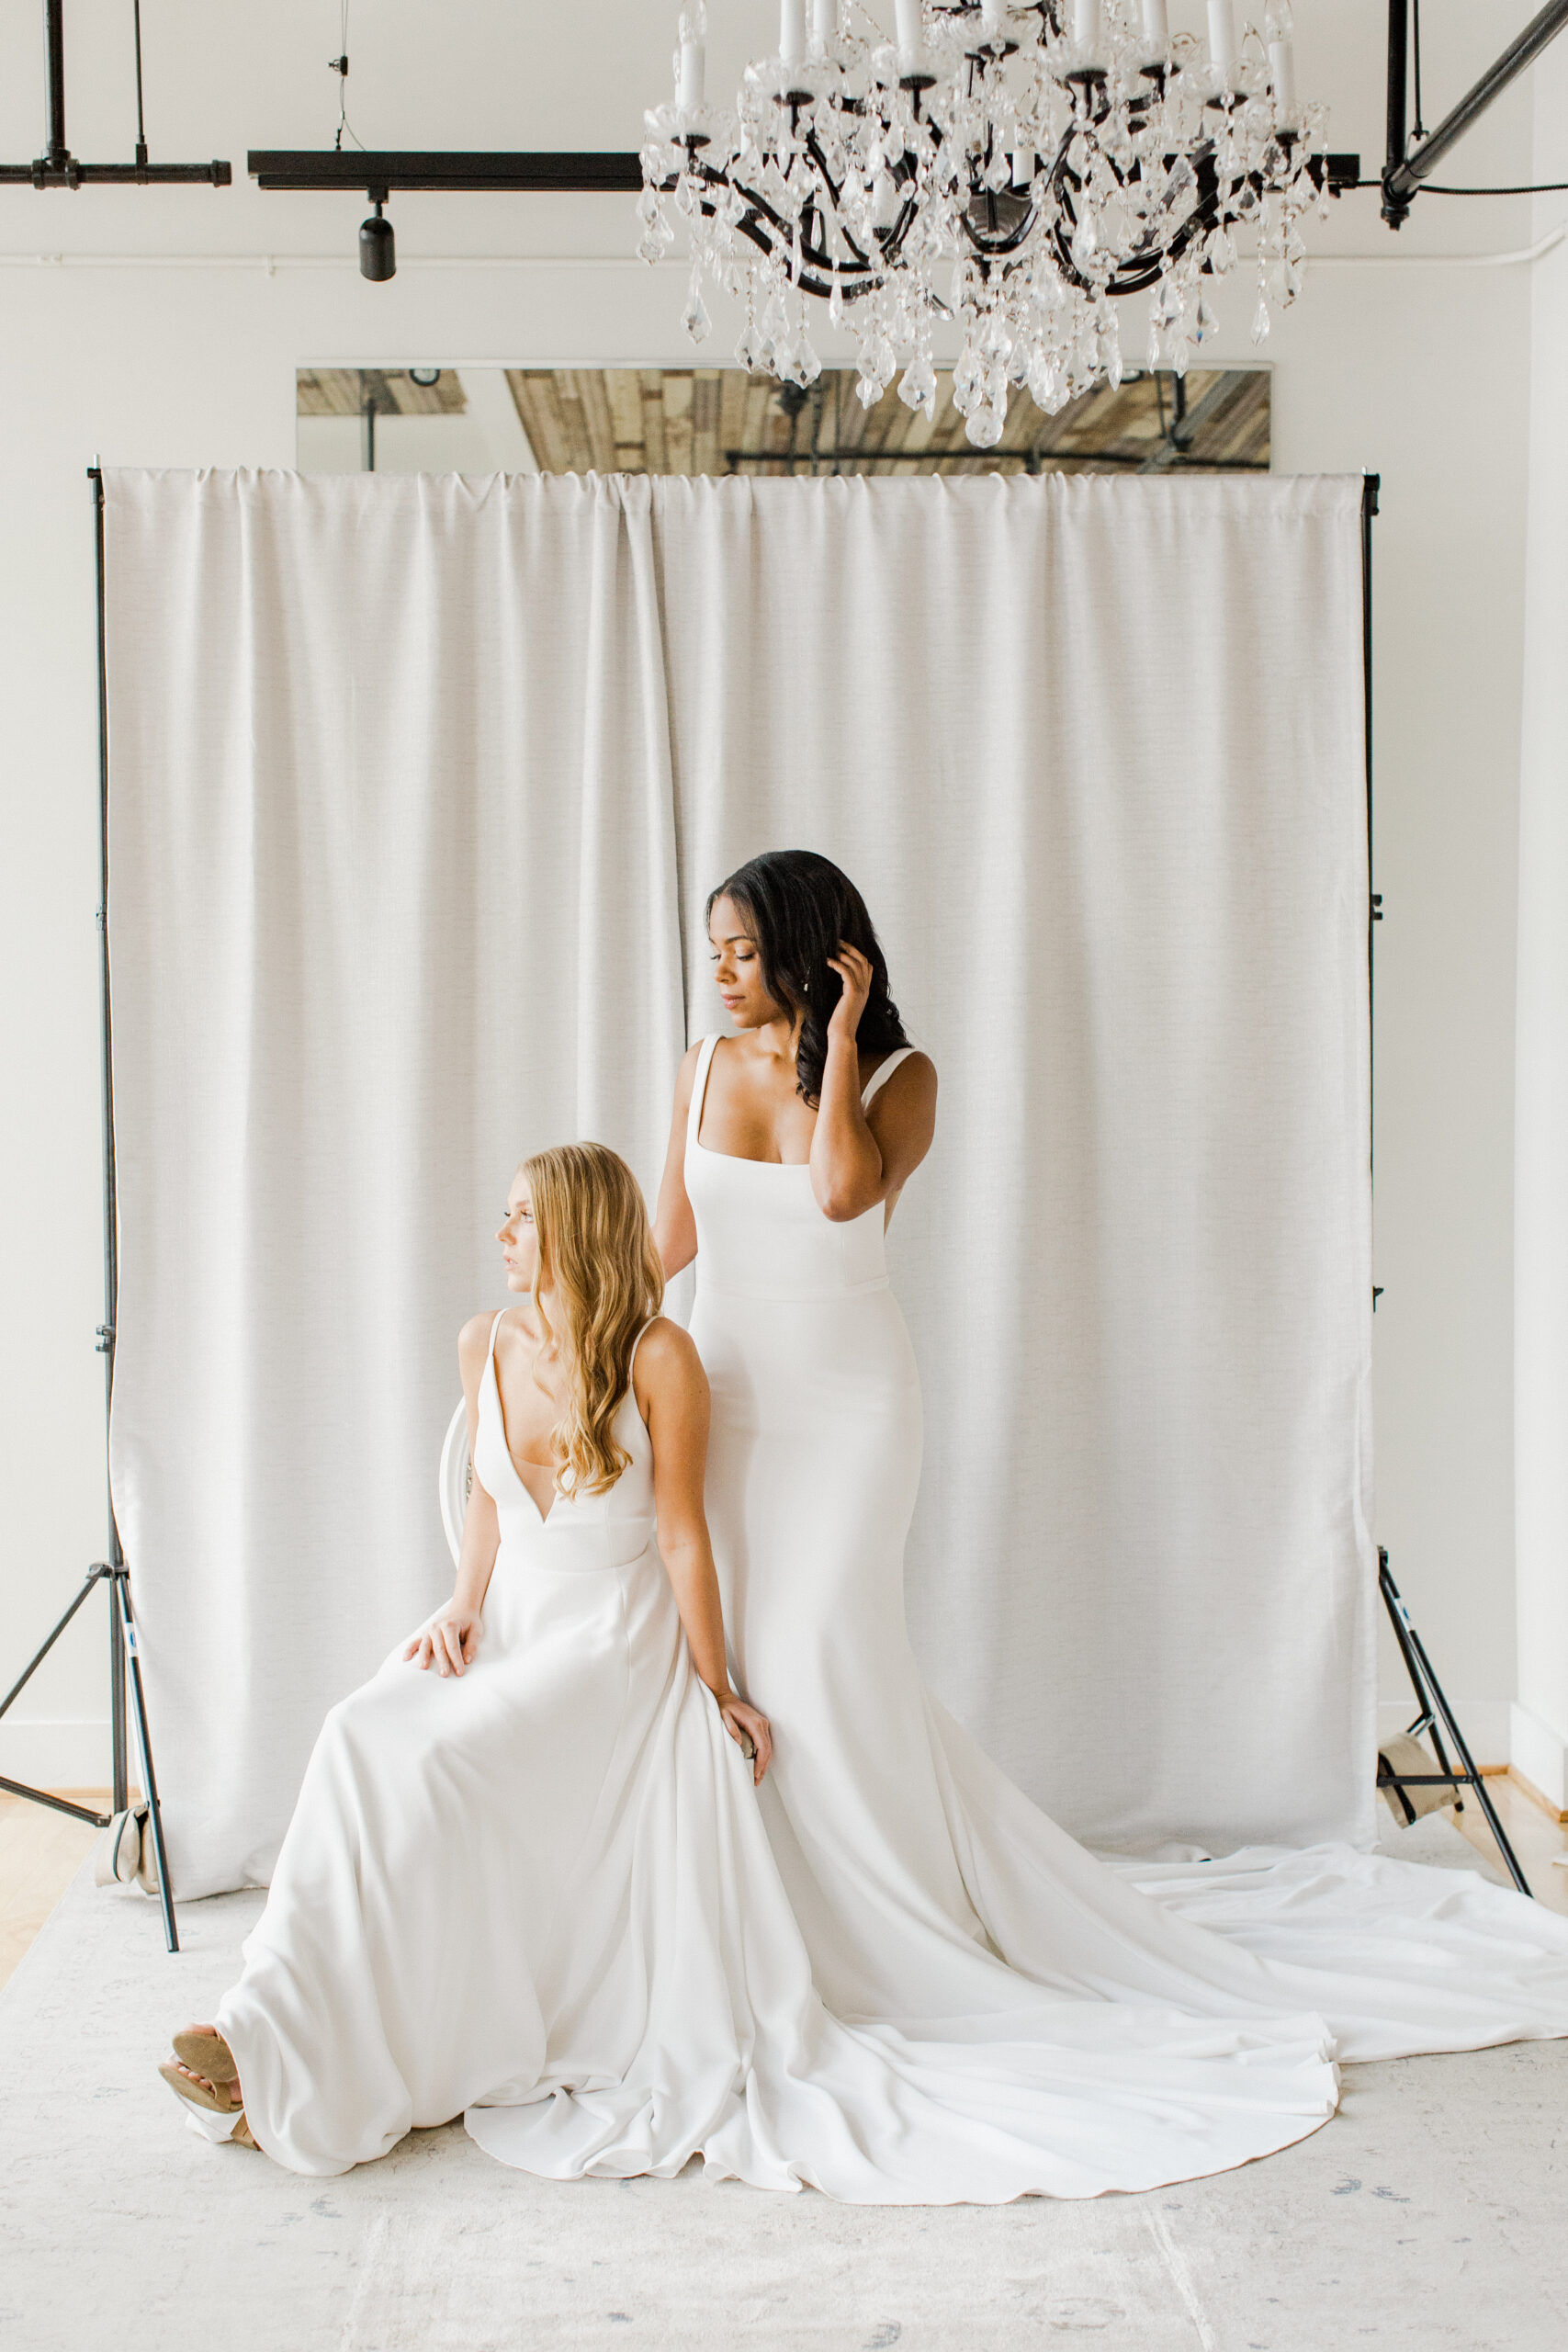 Two bridal models standing in front of photoshoot backdrop in simple wedding dresses.